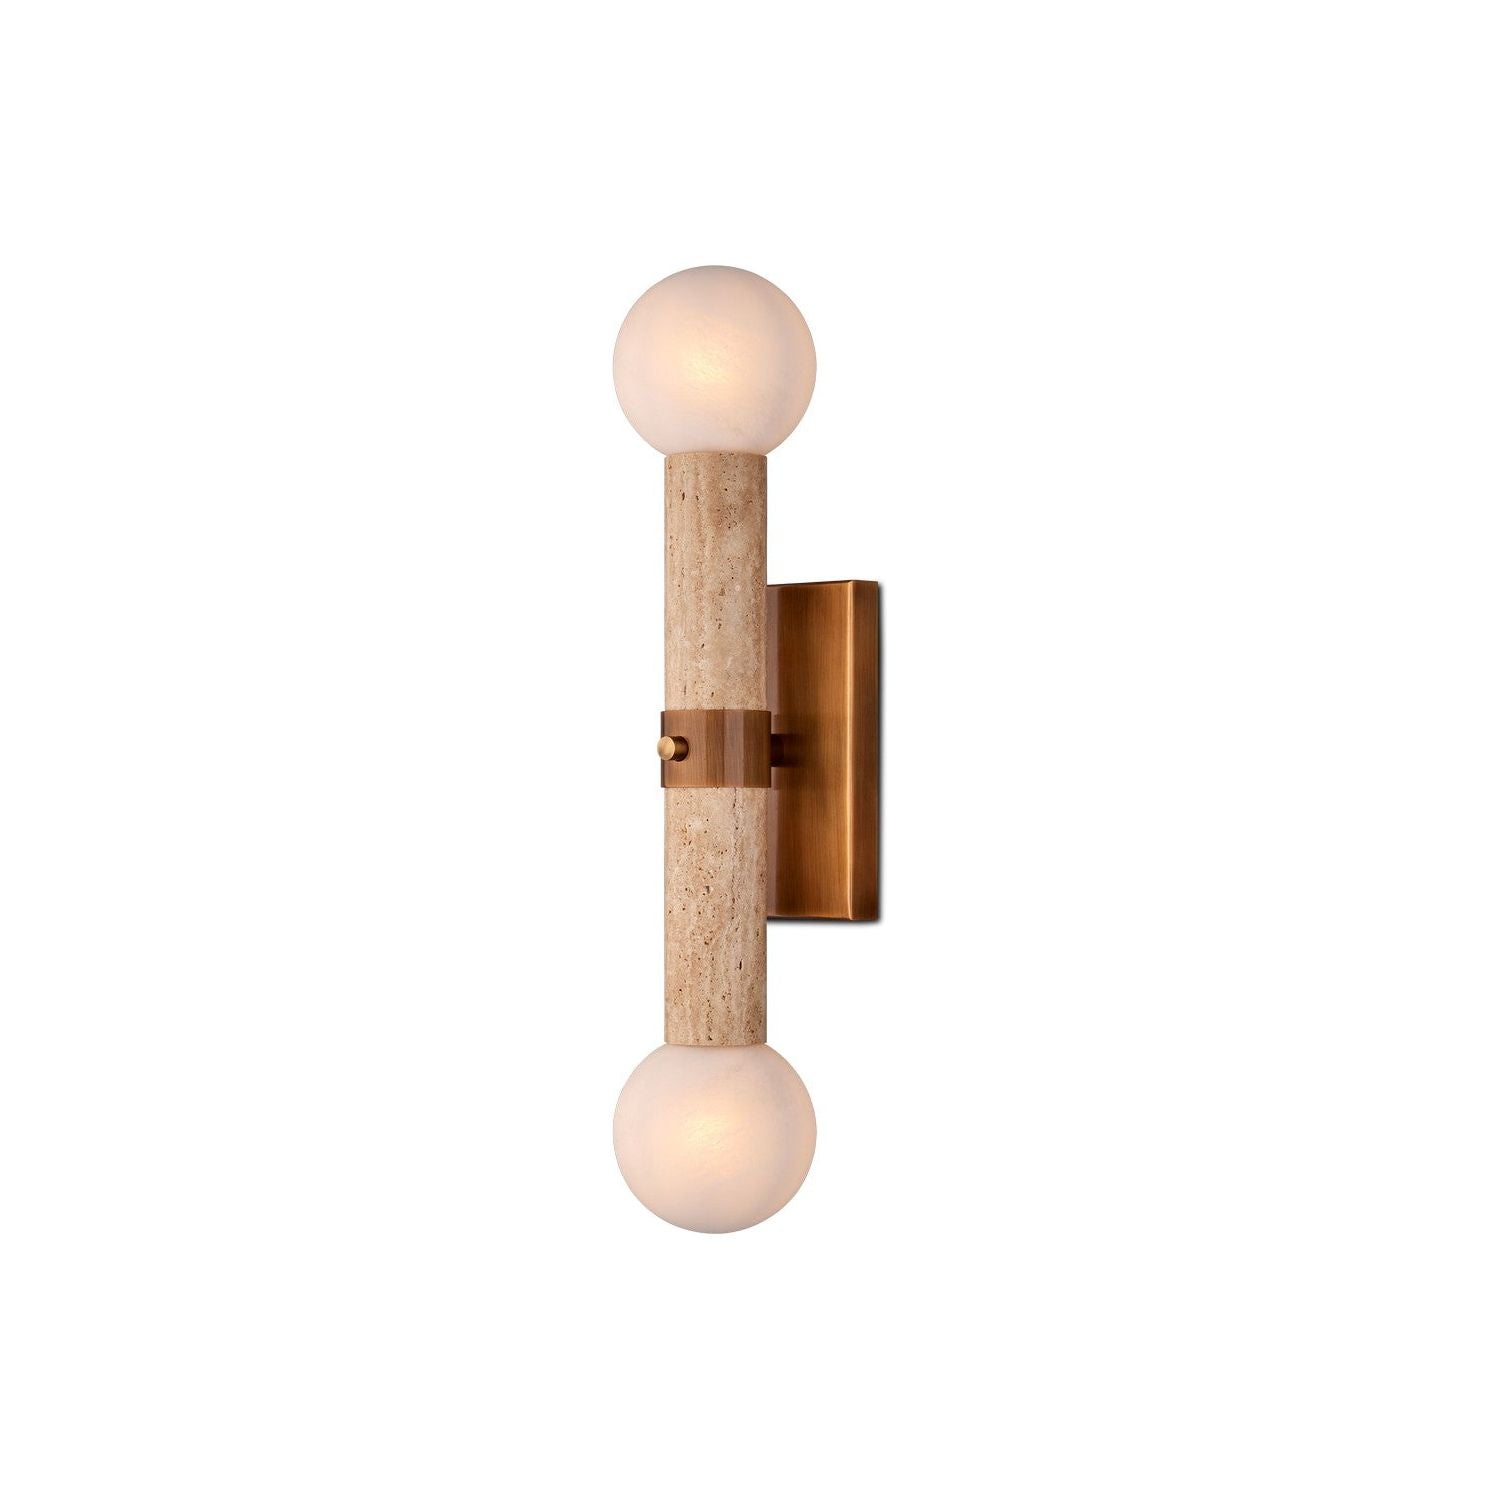 Currey and Company - 5800-0047 - Two Light Wall Sconce - Beige/Antique Brass/White